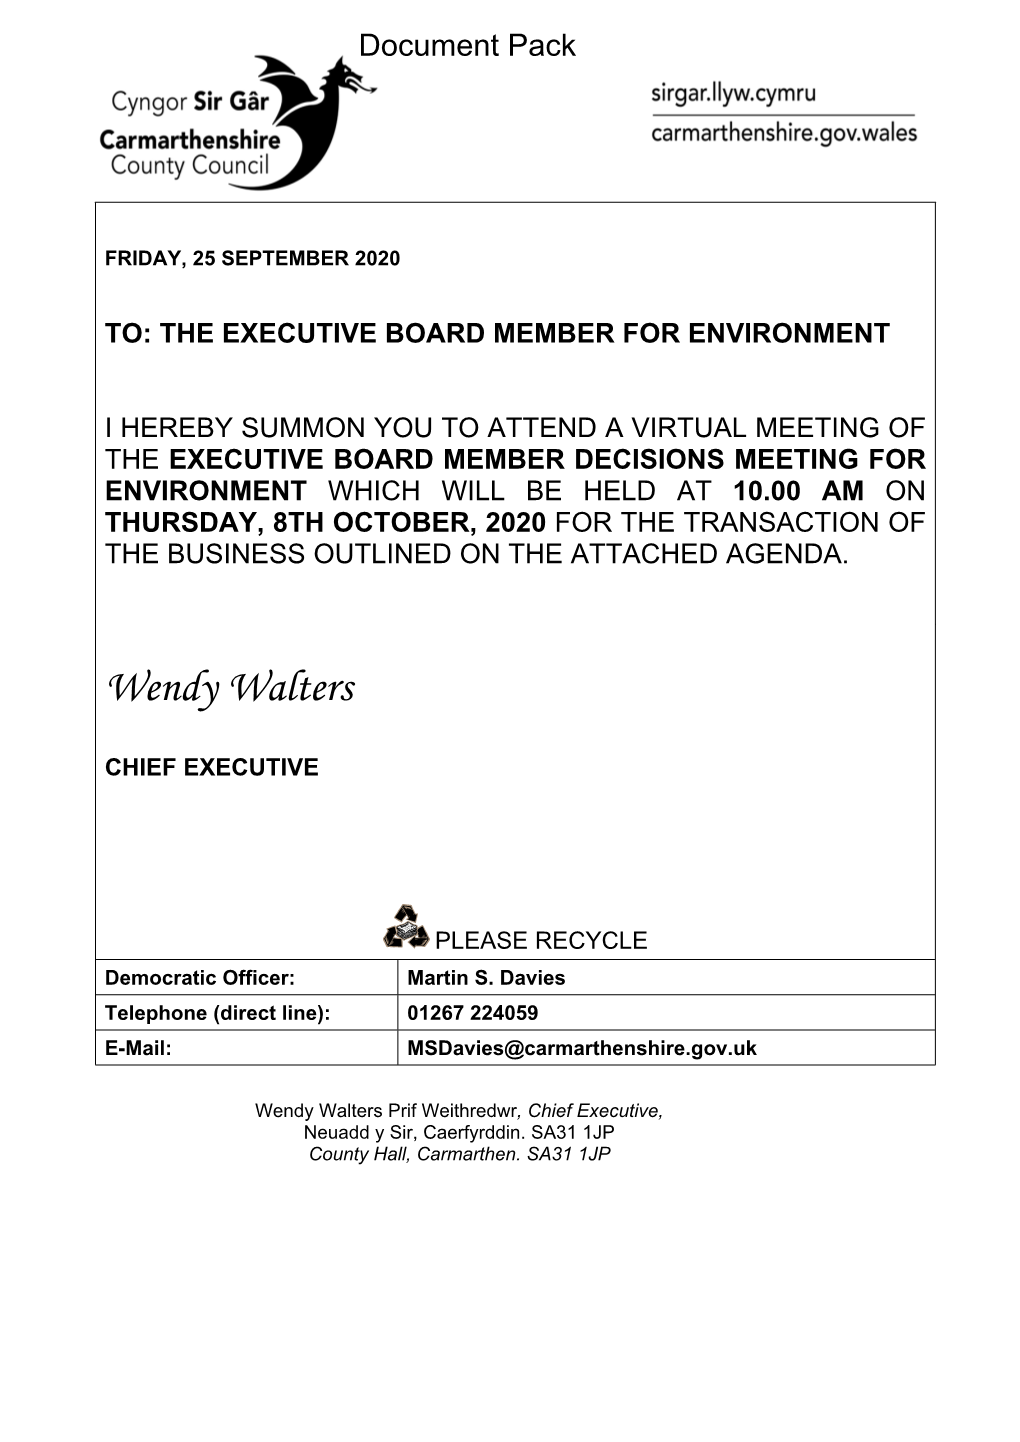 (Public Pack)Agenda Document for Executive Board Member Decisions Meeting for Environment, 08/10/2020 10:00